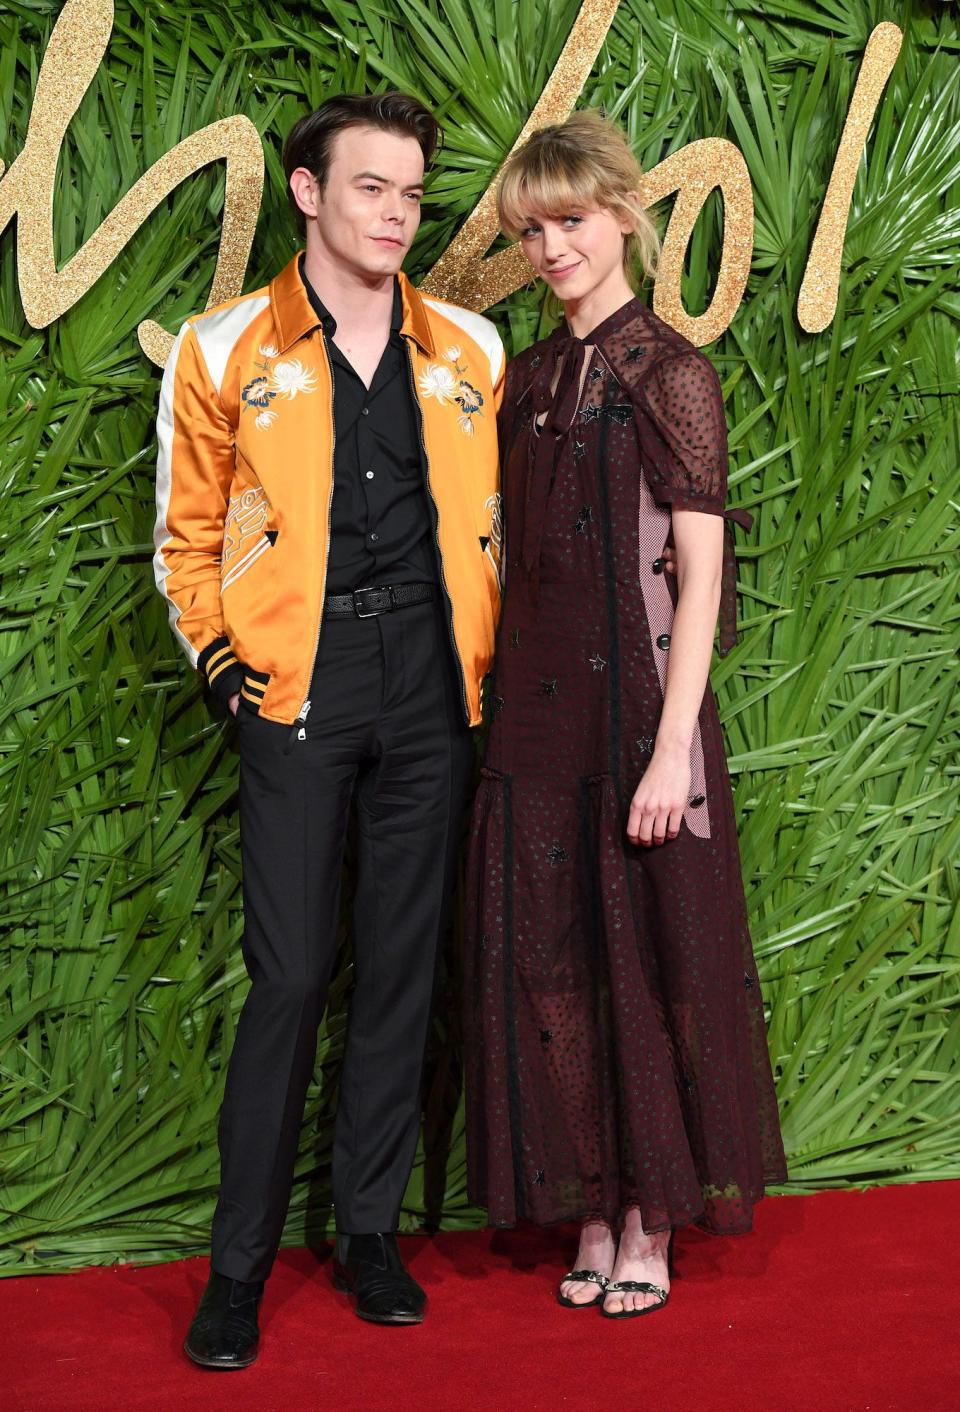 Charlie Heaton and Natalia Dyer at The Fashion Awards in England on December 4, 2017.